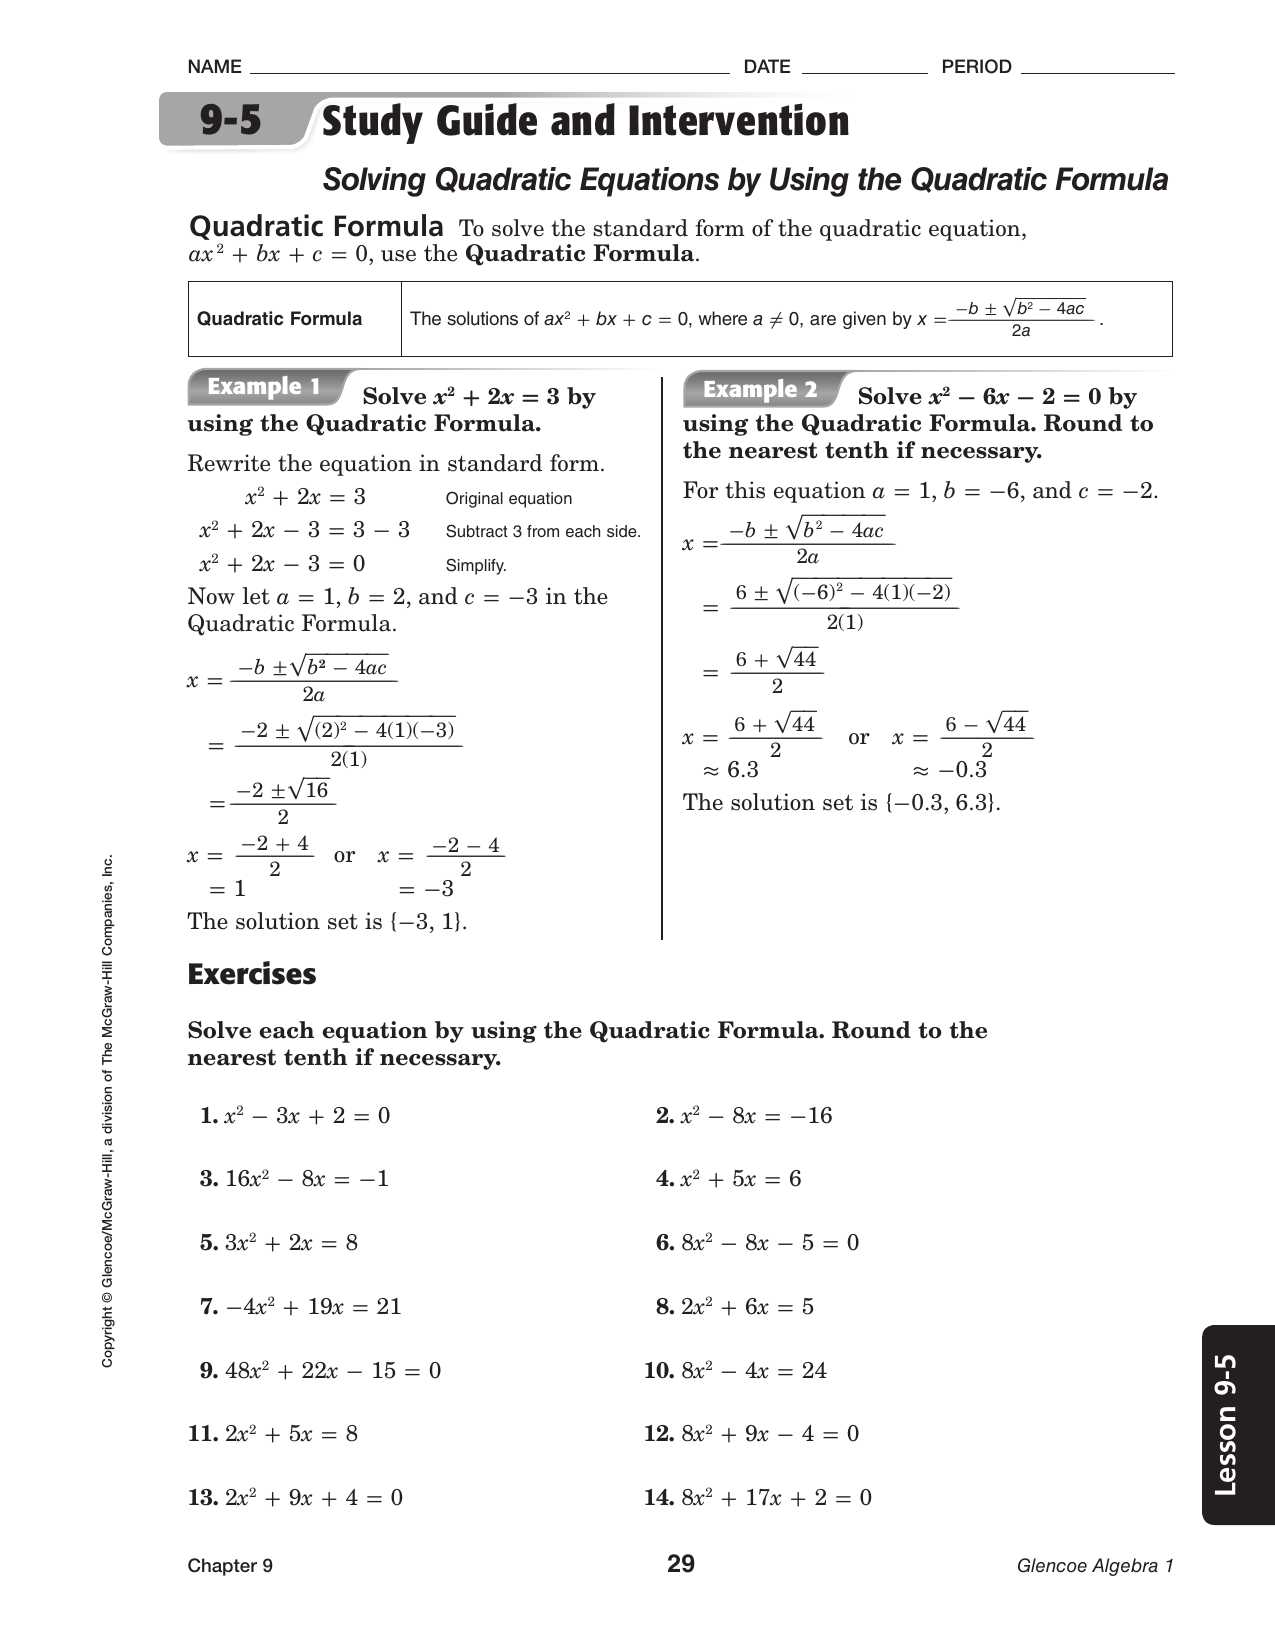 Solving Quadratic Equations by Completing the Square Worksheet Answer Key or Perfect Square Factoring Worksheet Gallery Worksheet Math for Kids